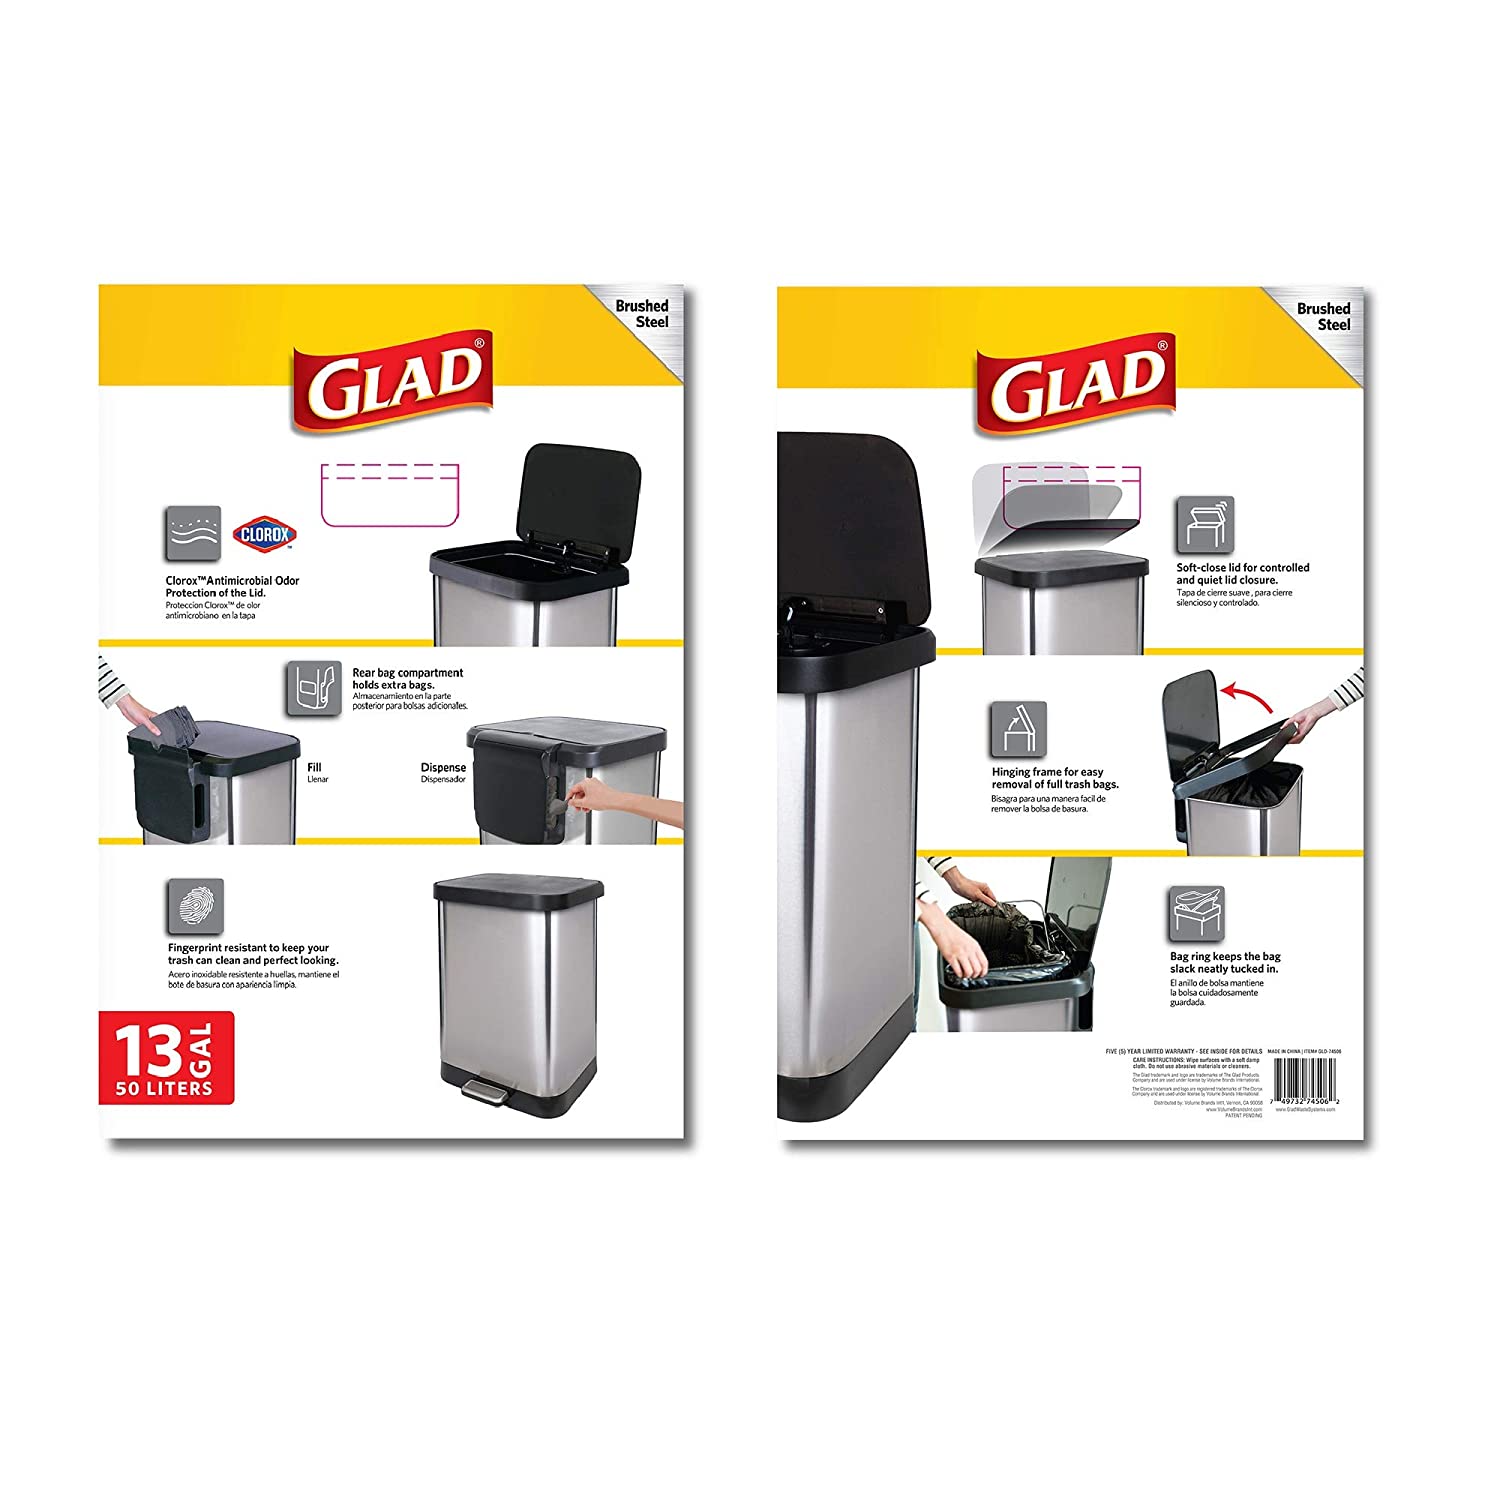 https://discounttoday.net/wp-content/uploads/2022/12/Glad-GLD-74506-Stainless-Steel-Step-Trash-Can-with-Clorox-Odor-Protection-6.jpg